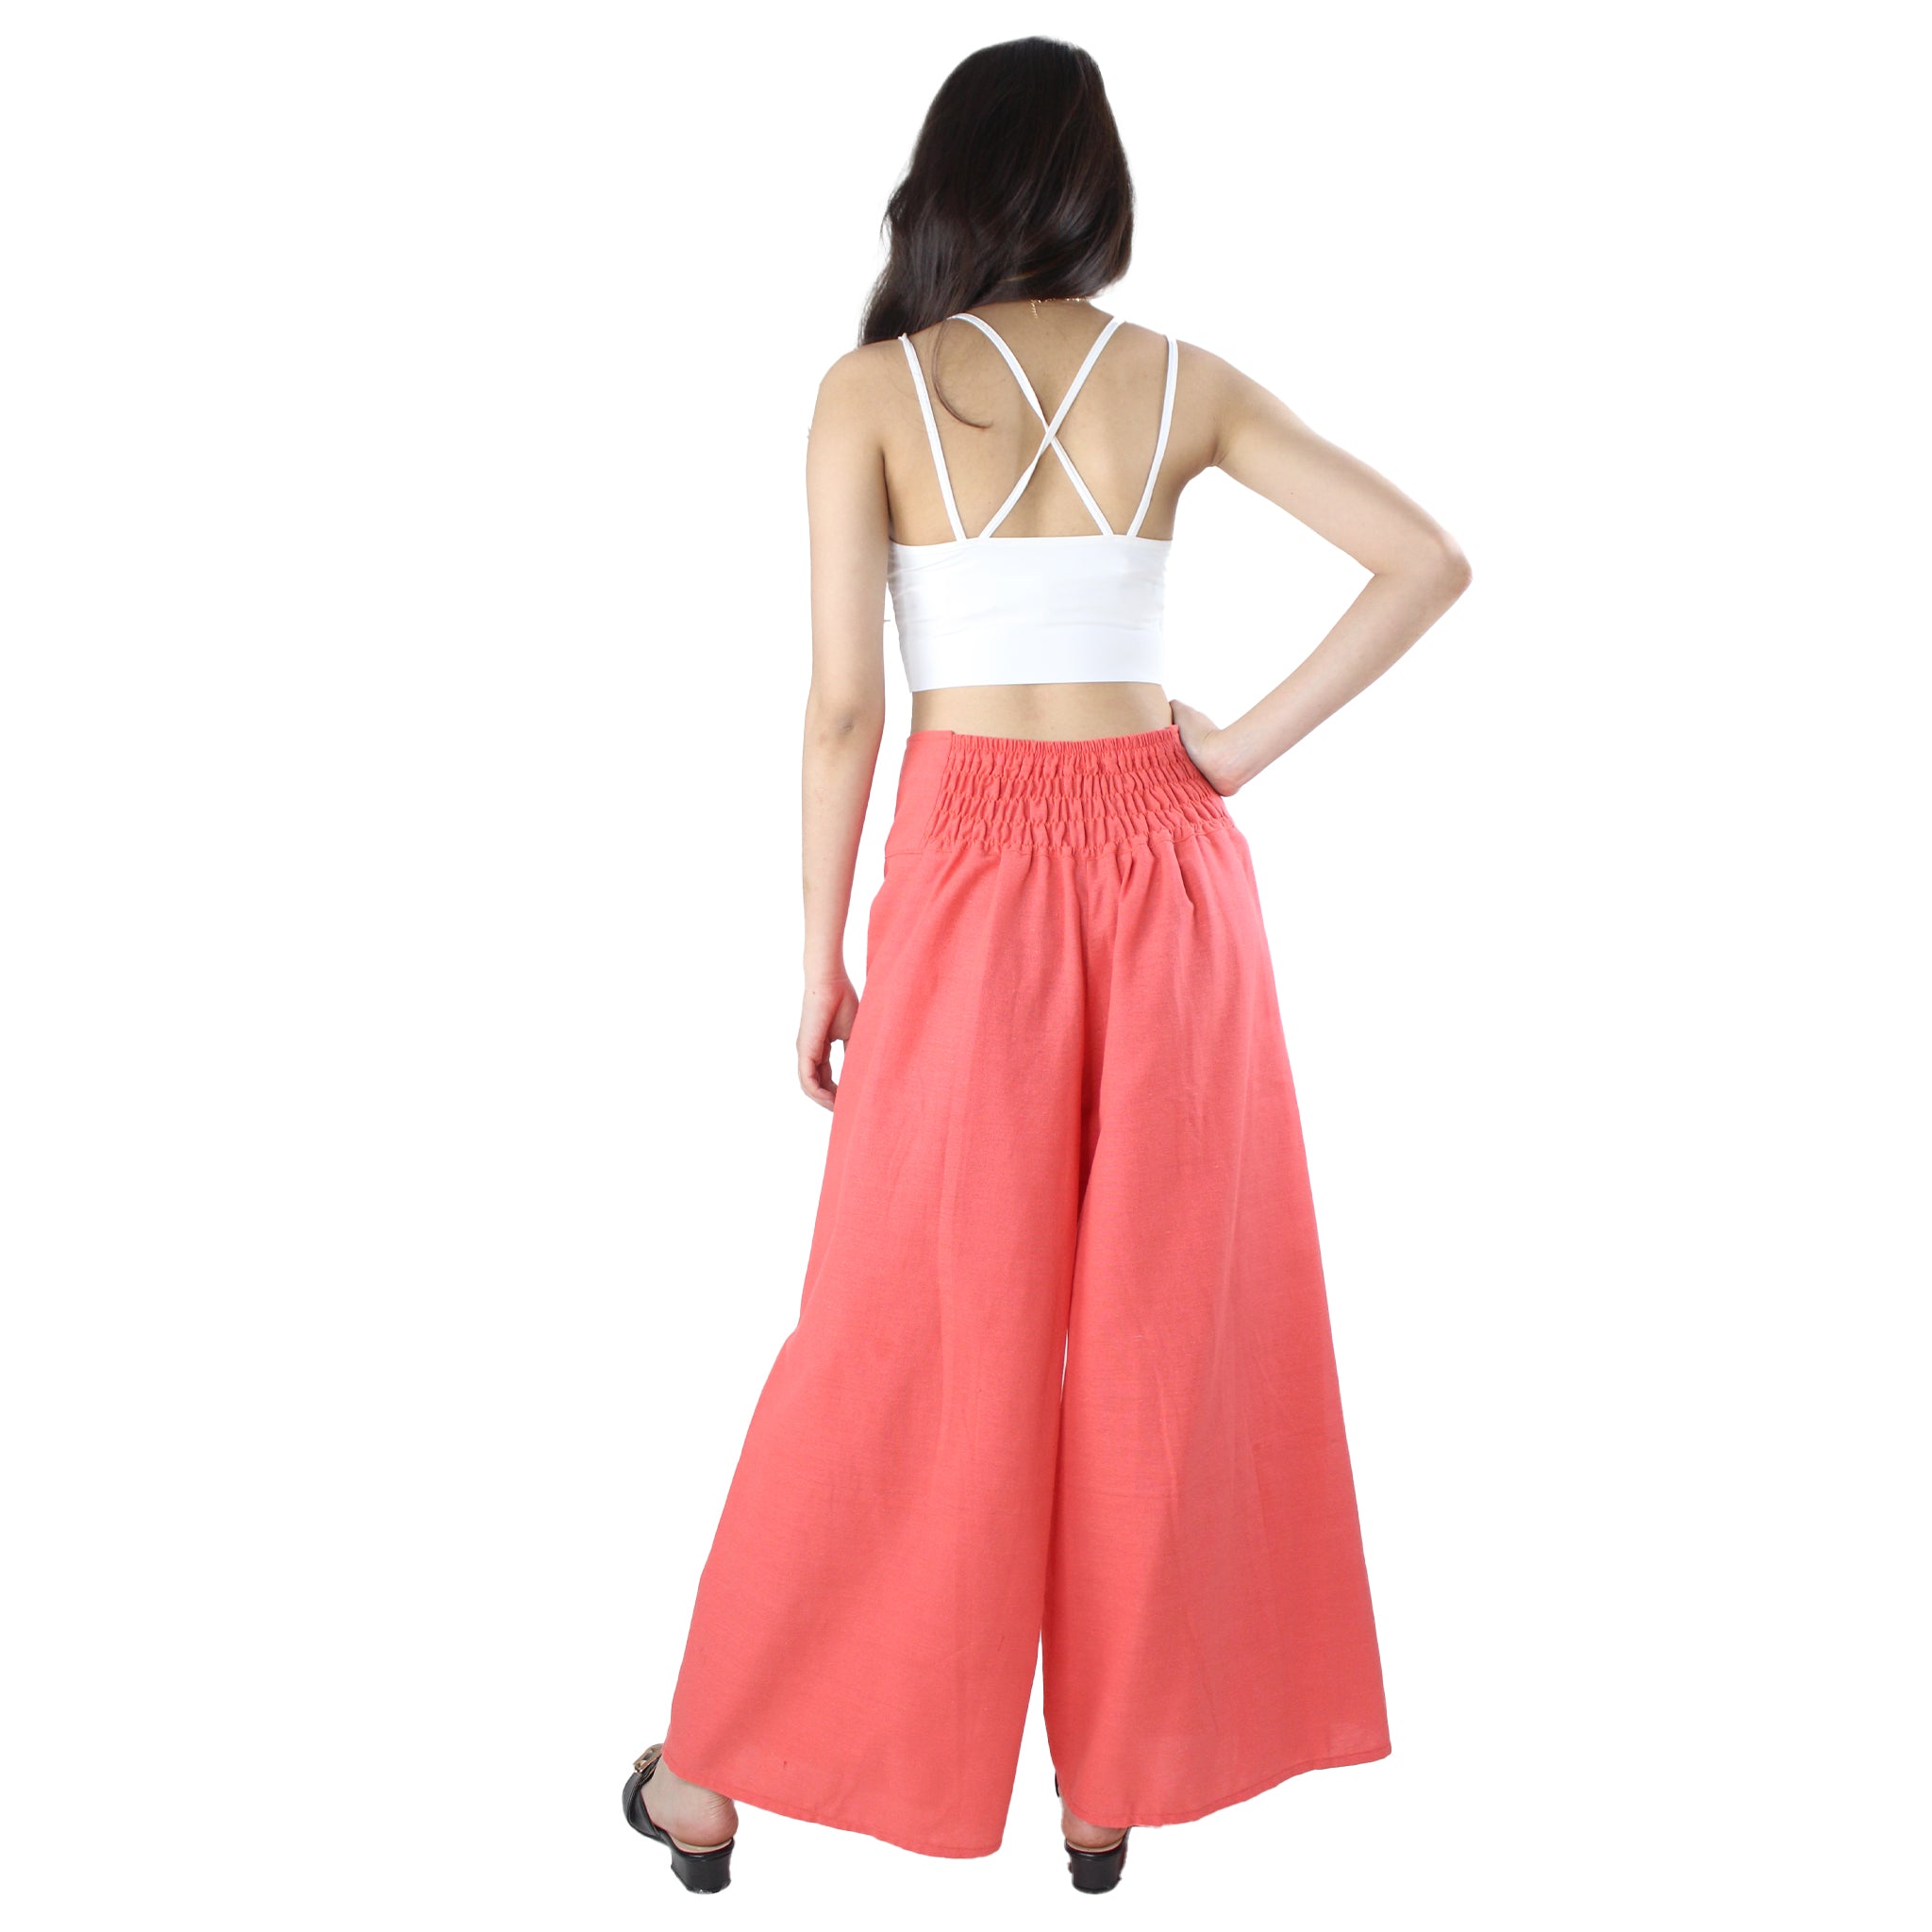 Buy Plum High Low Top Matched With Peach Dhoti Pants Online - Kalki Fashion